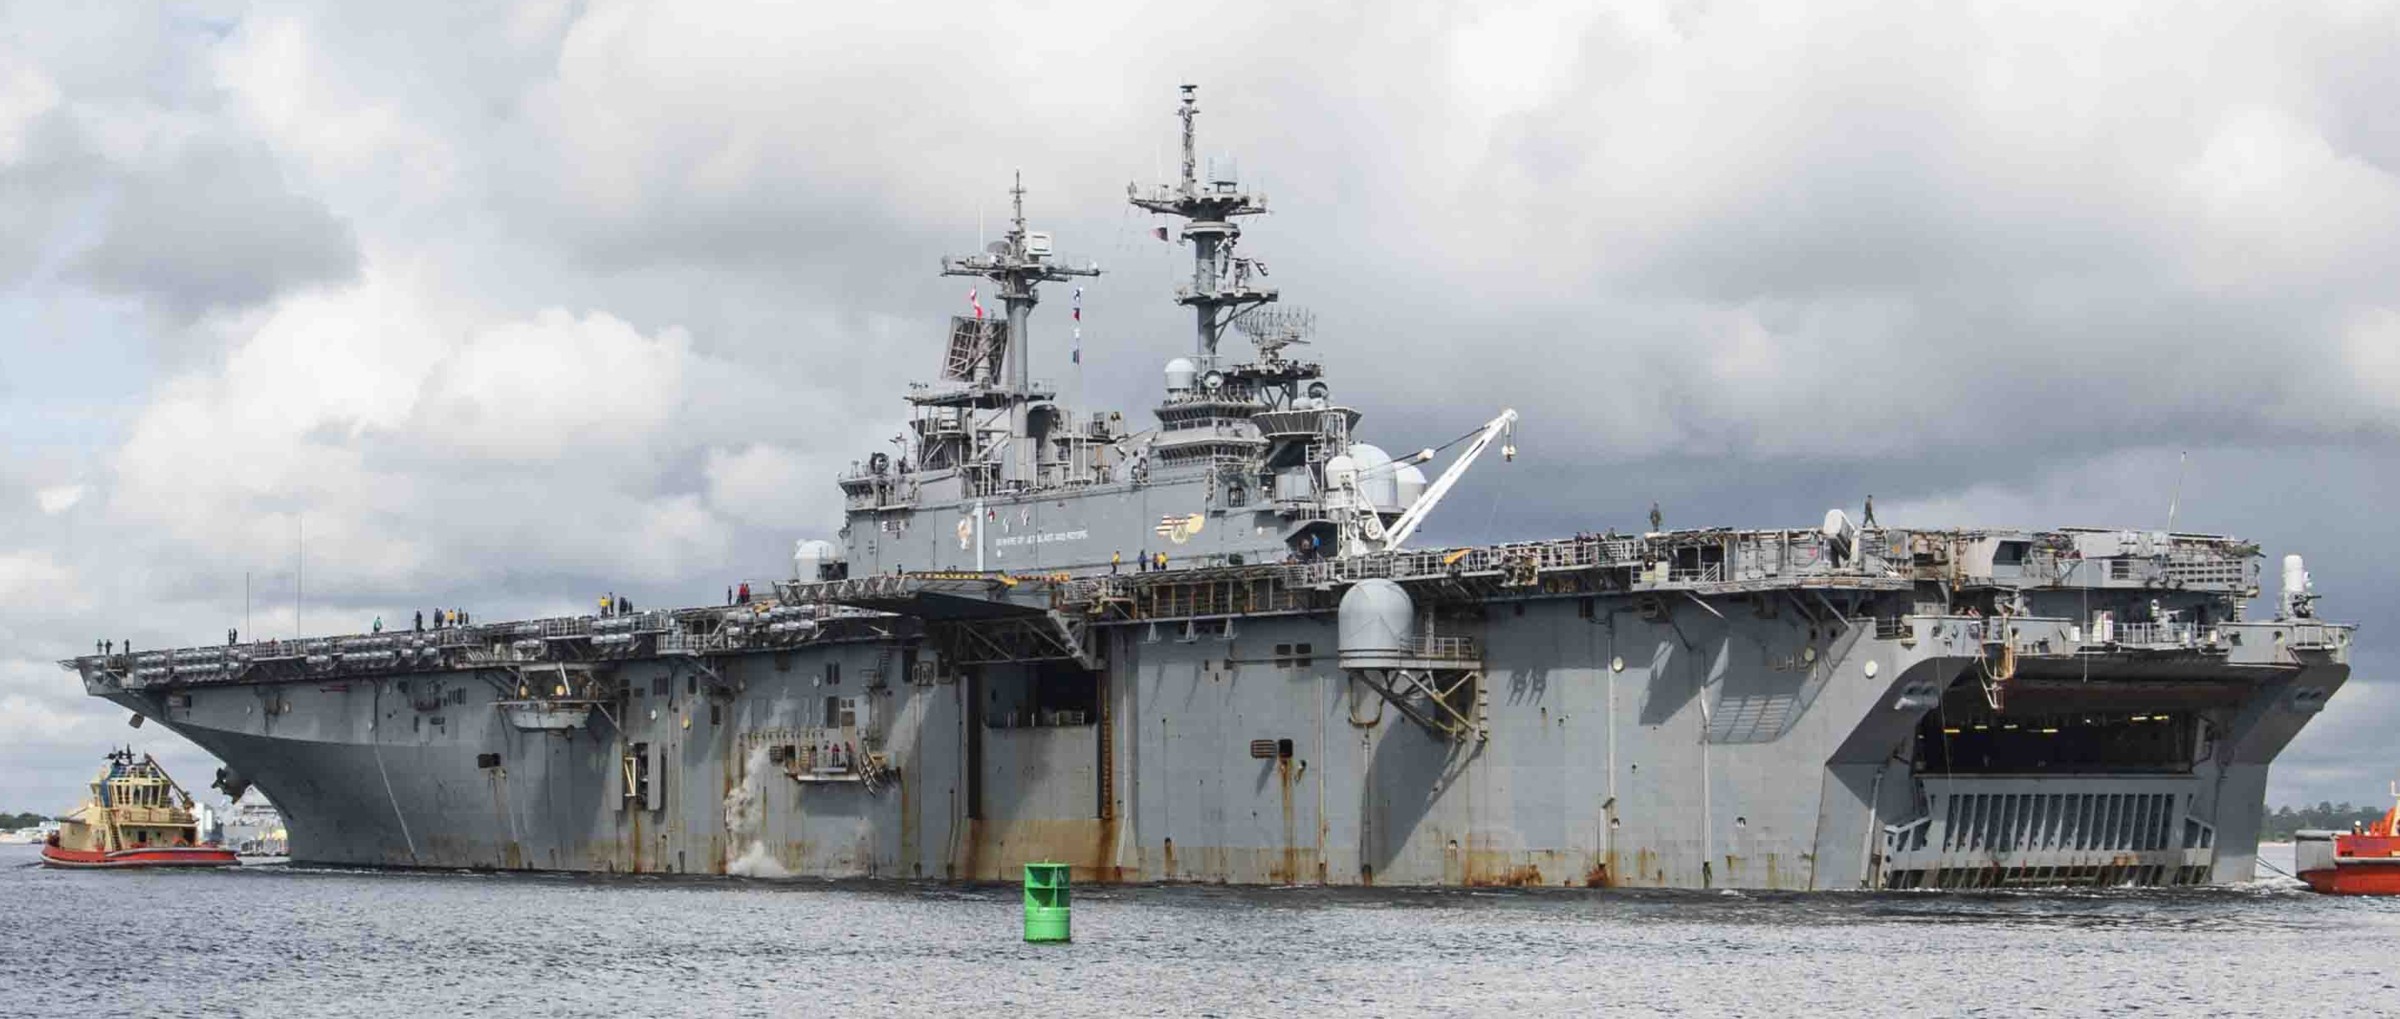 lhd-1 uss wasp amphibious assault landing ship dock helicopter us navy 165 naval station norfolk